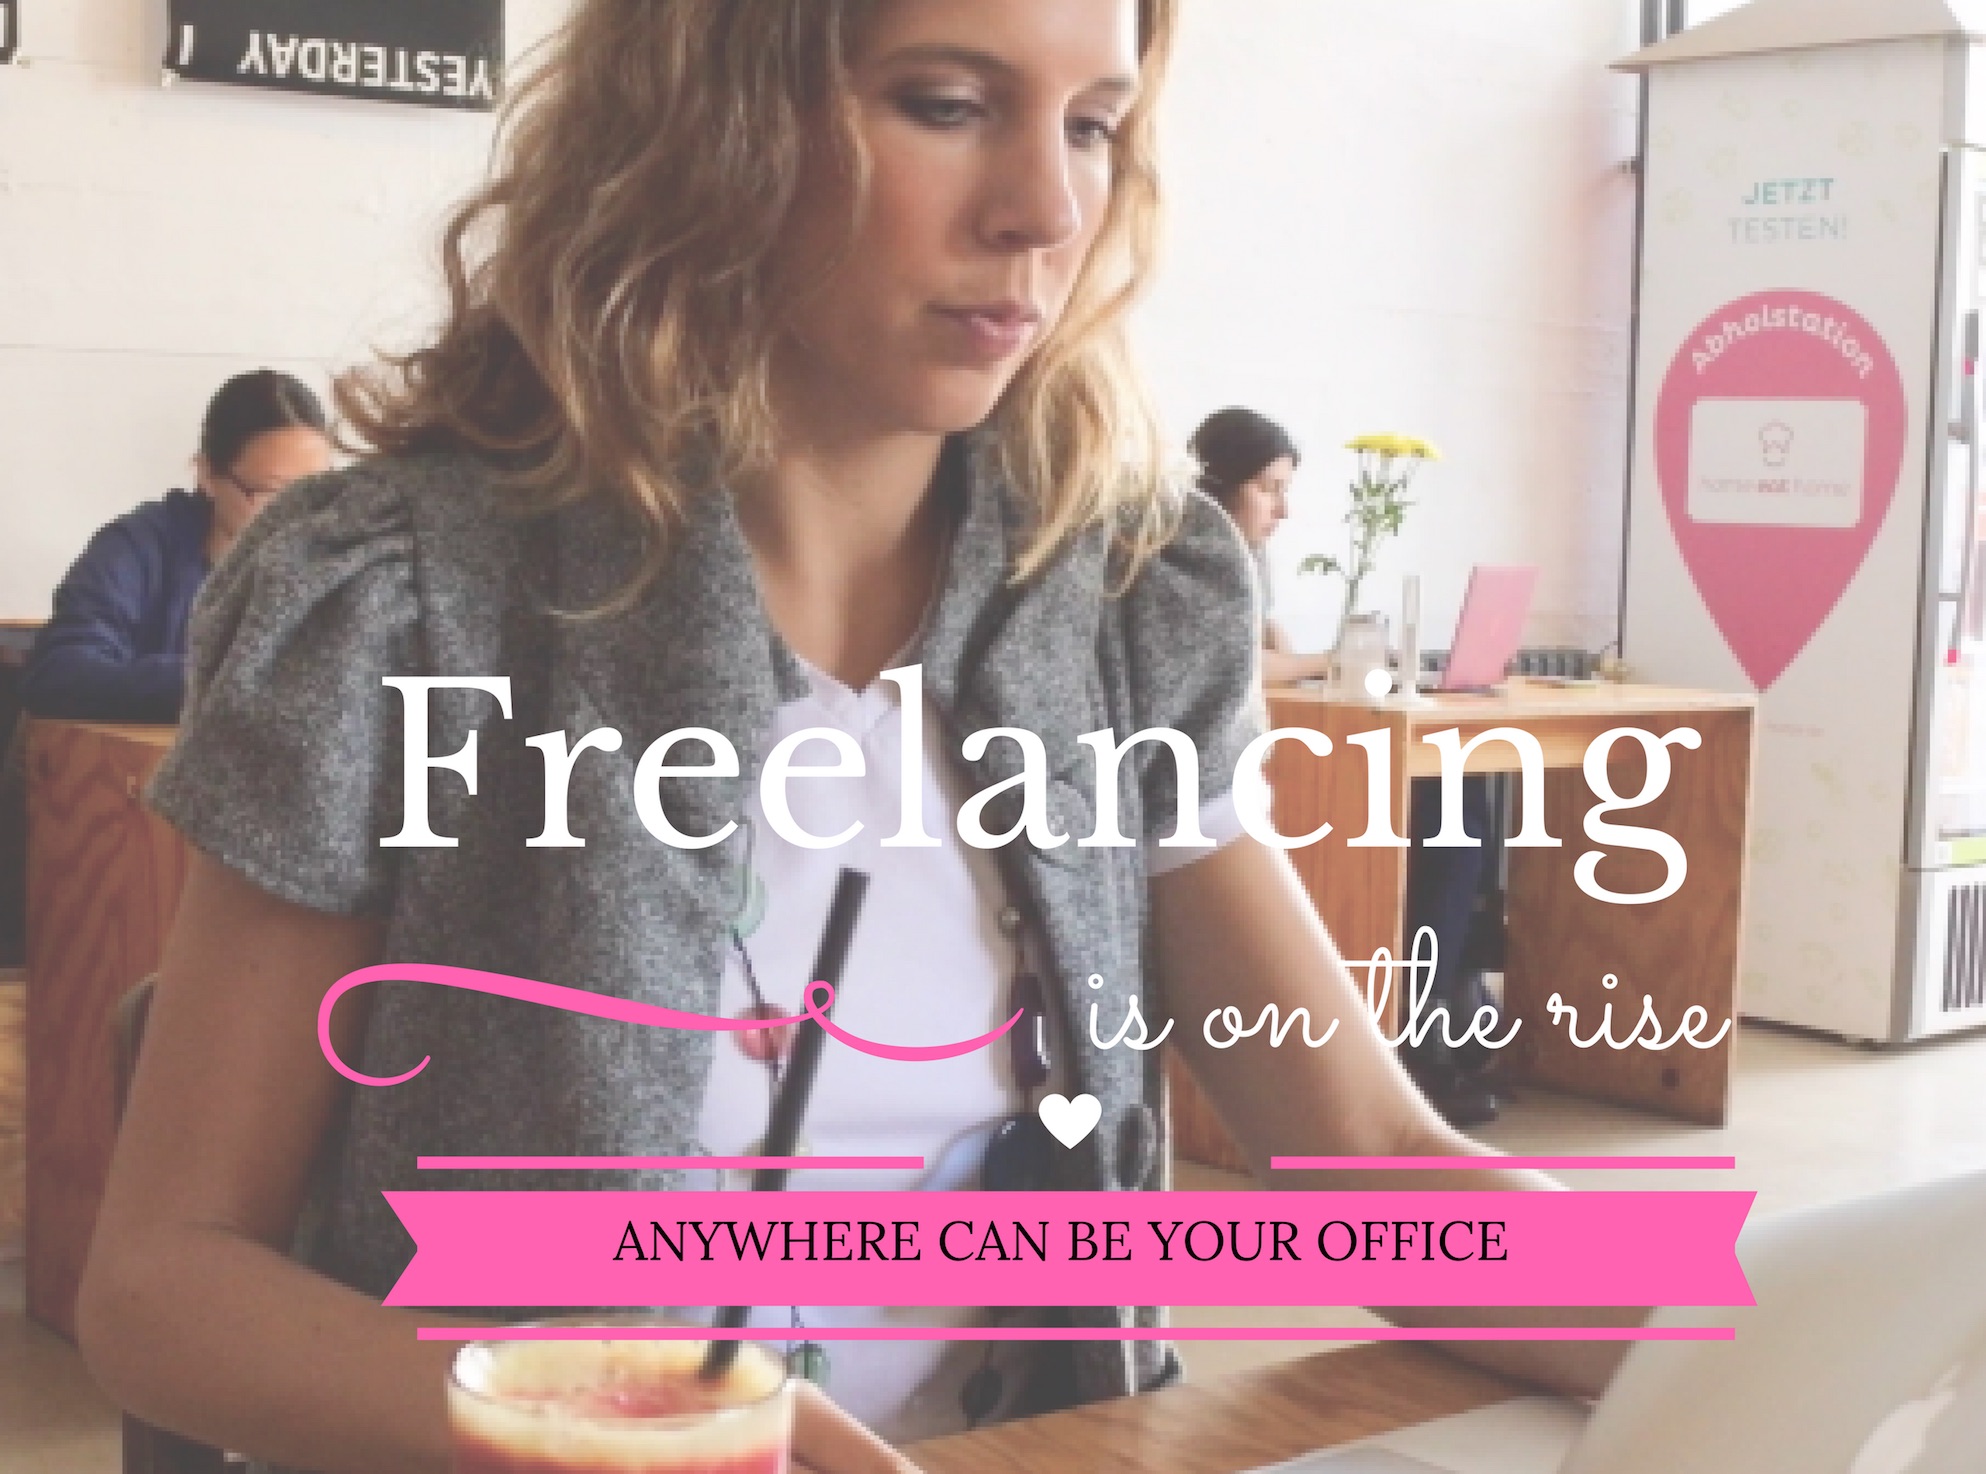 Freelancing can be done anywhere in the world